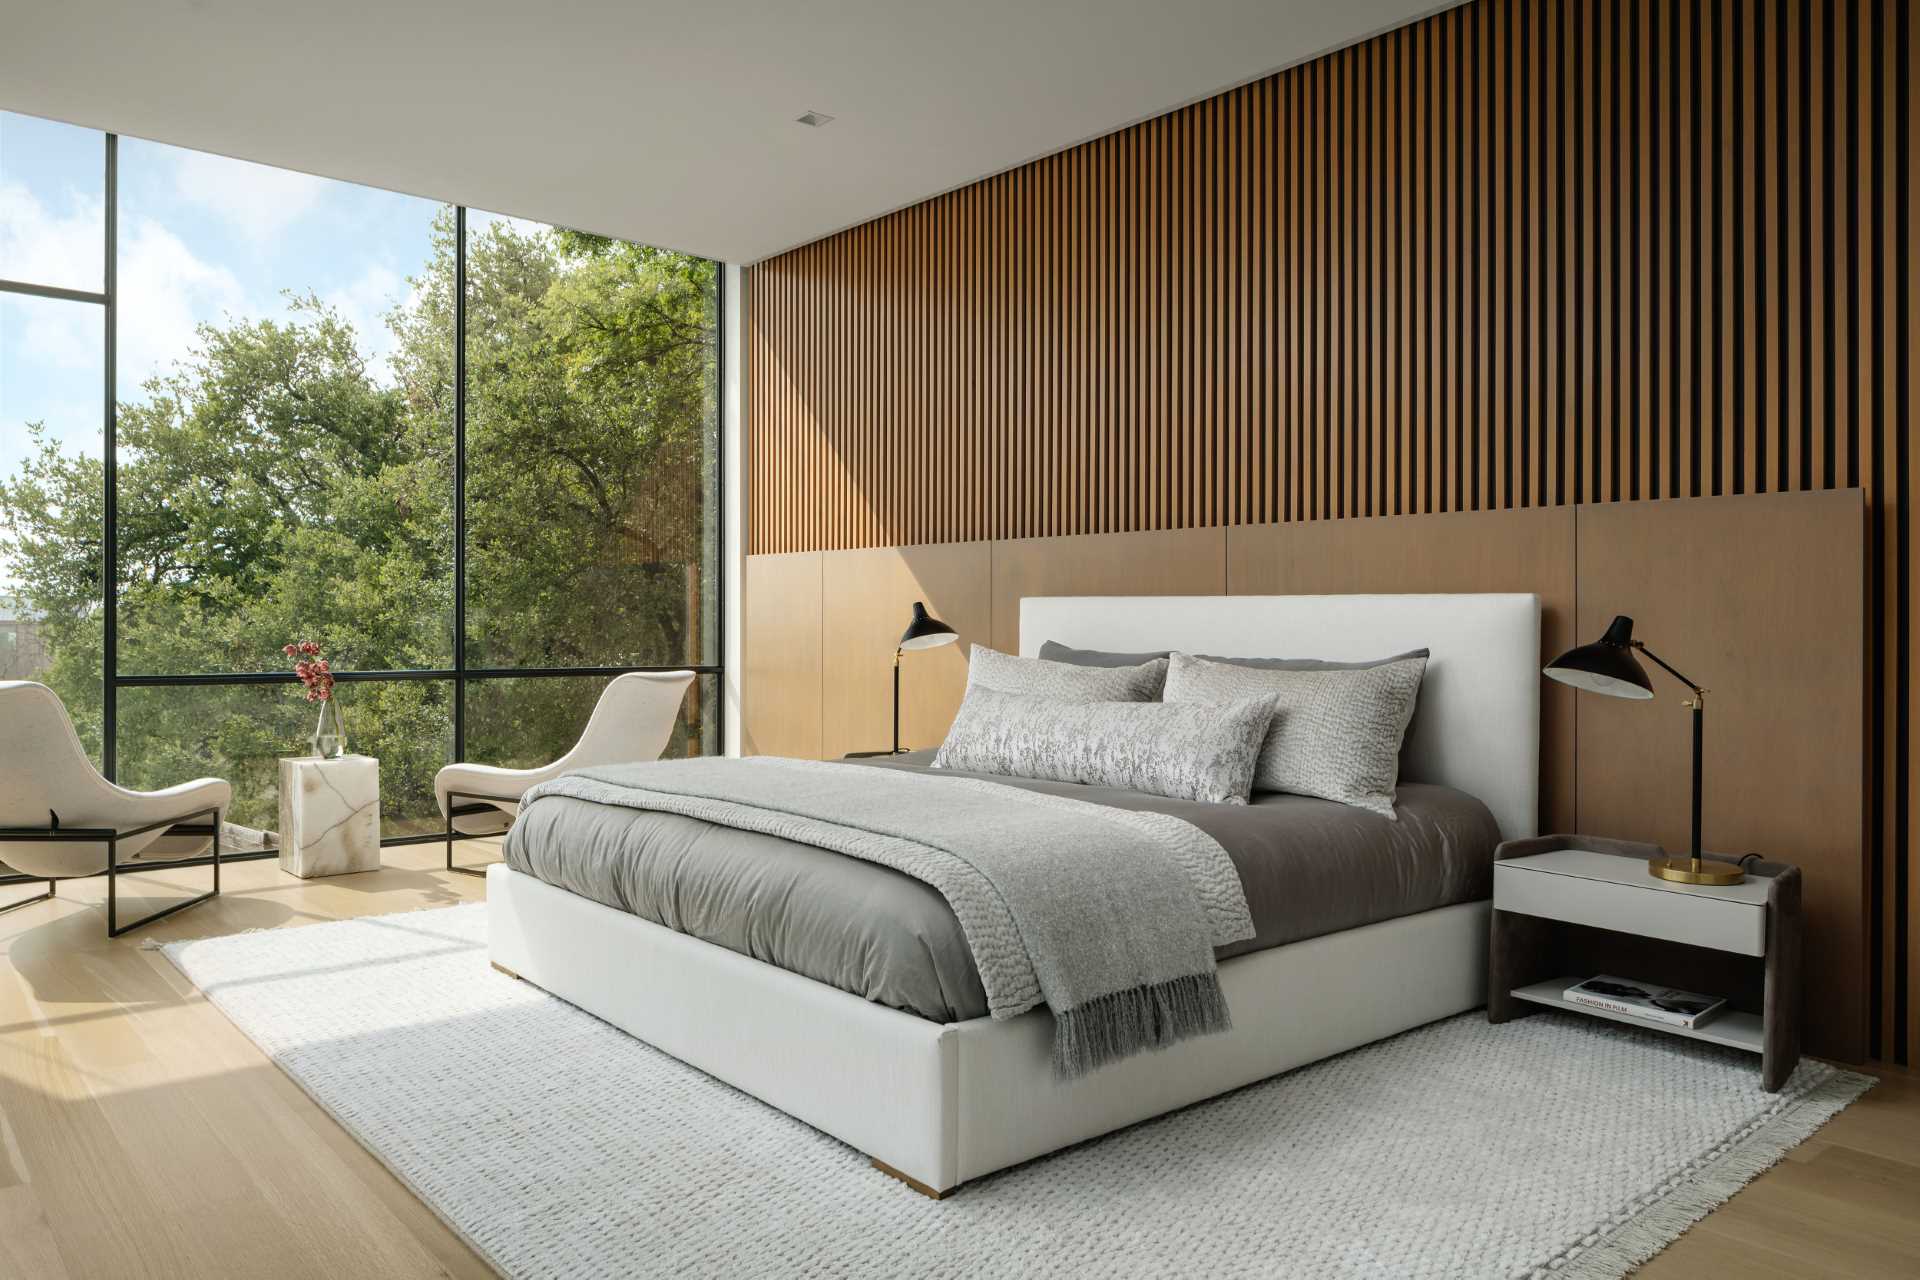 The primary suite is cantilevered above the sloping grade and is the closest part of the residence to the city, allowing the bedroom to essentially float a، the treetops while ،vering above the adjacent pool.